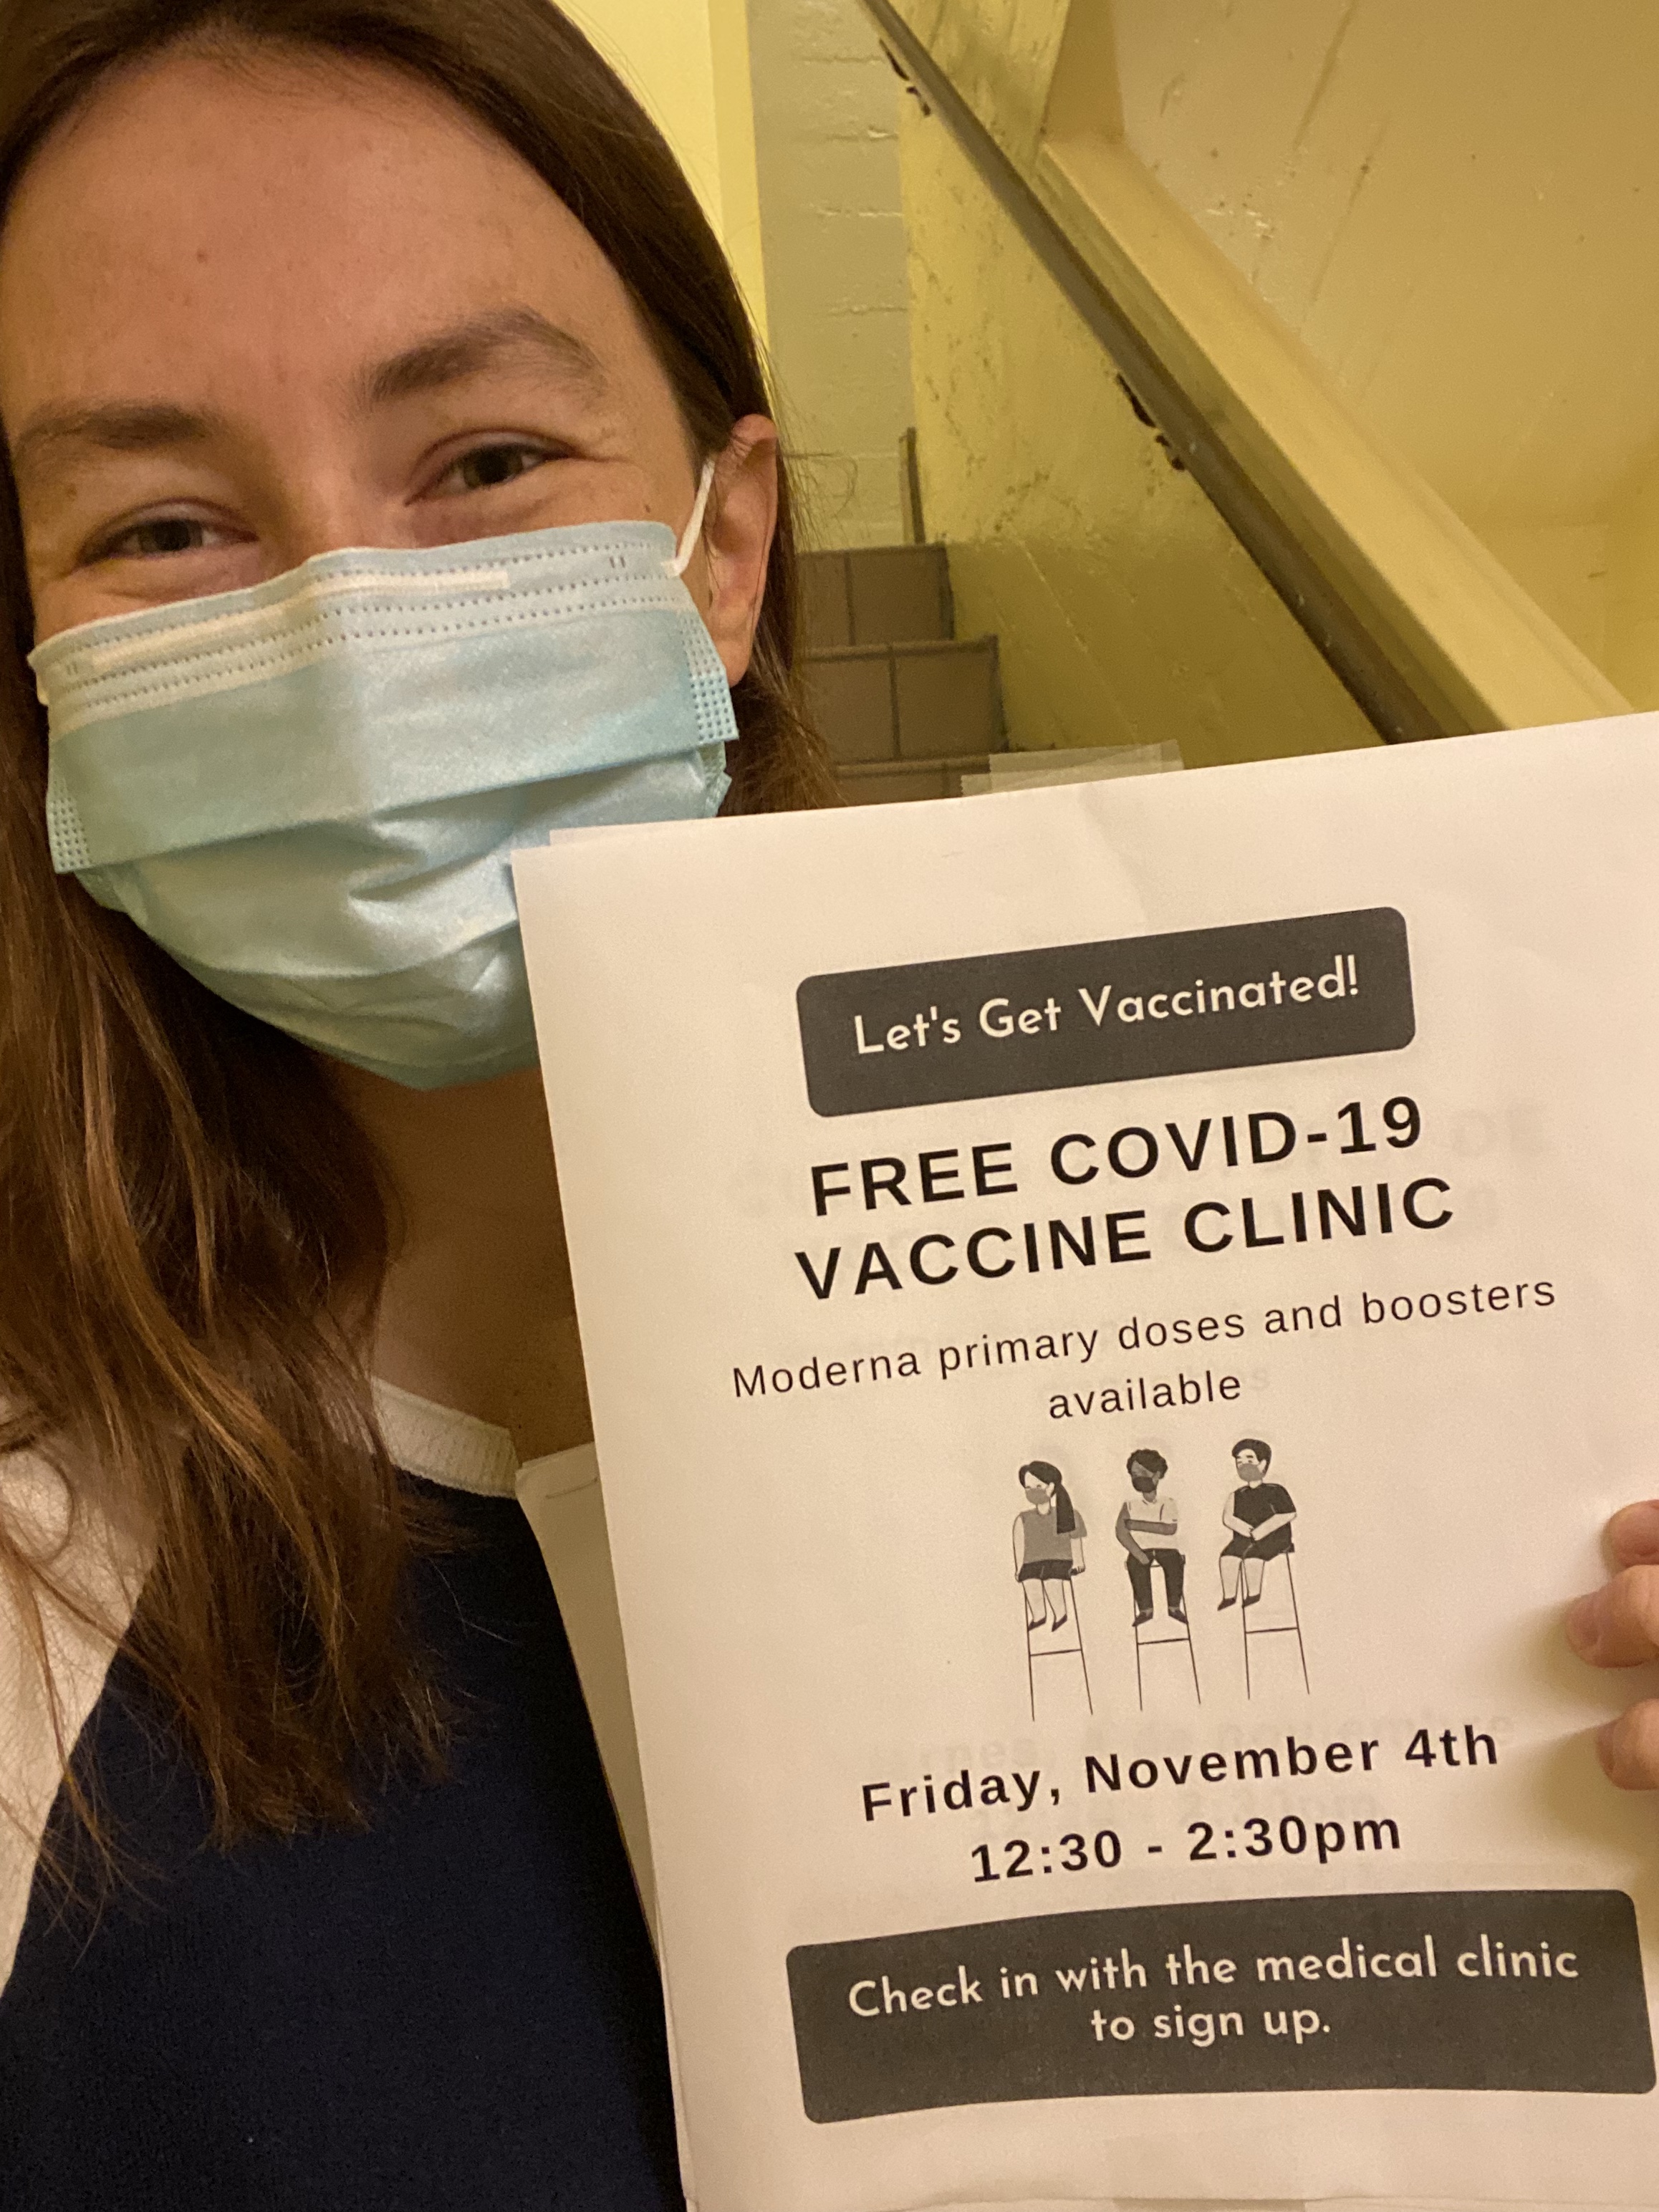 Catherine holding a free vaccination clinic flyer.